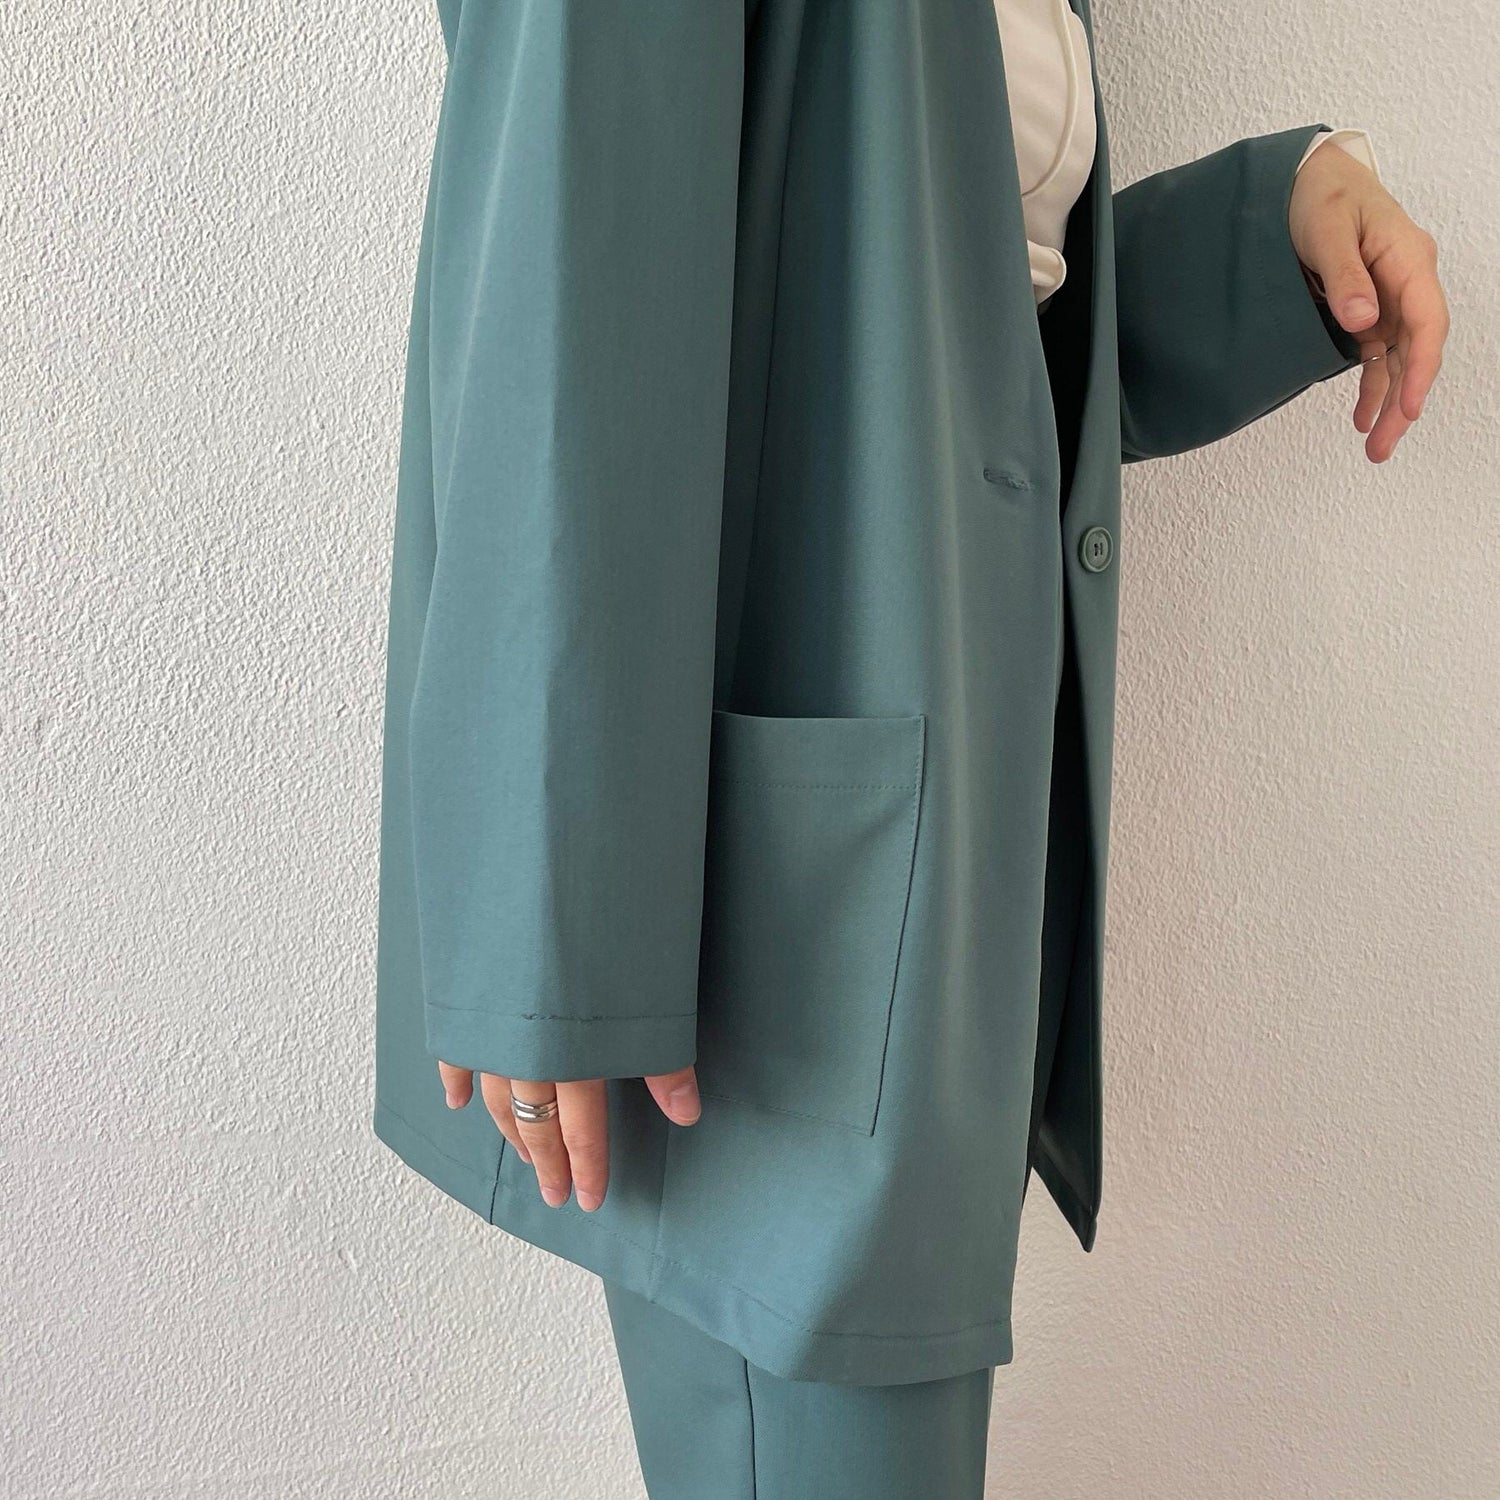 【SAMPLE】perfect silhouette no collar set up / green